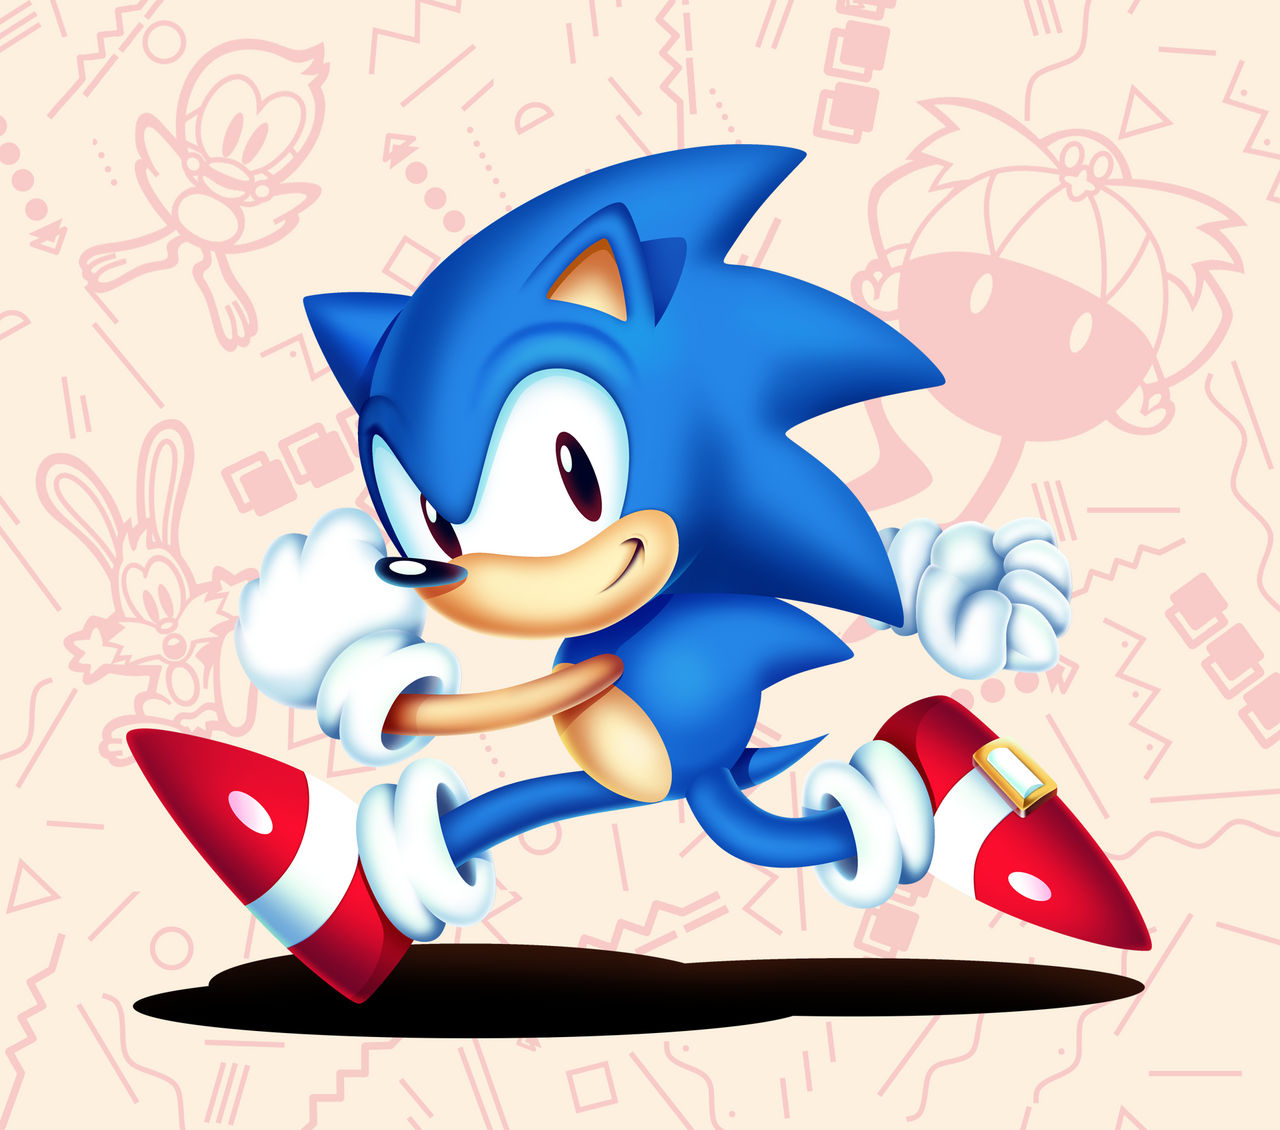 Is classic Sonic a kid?